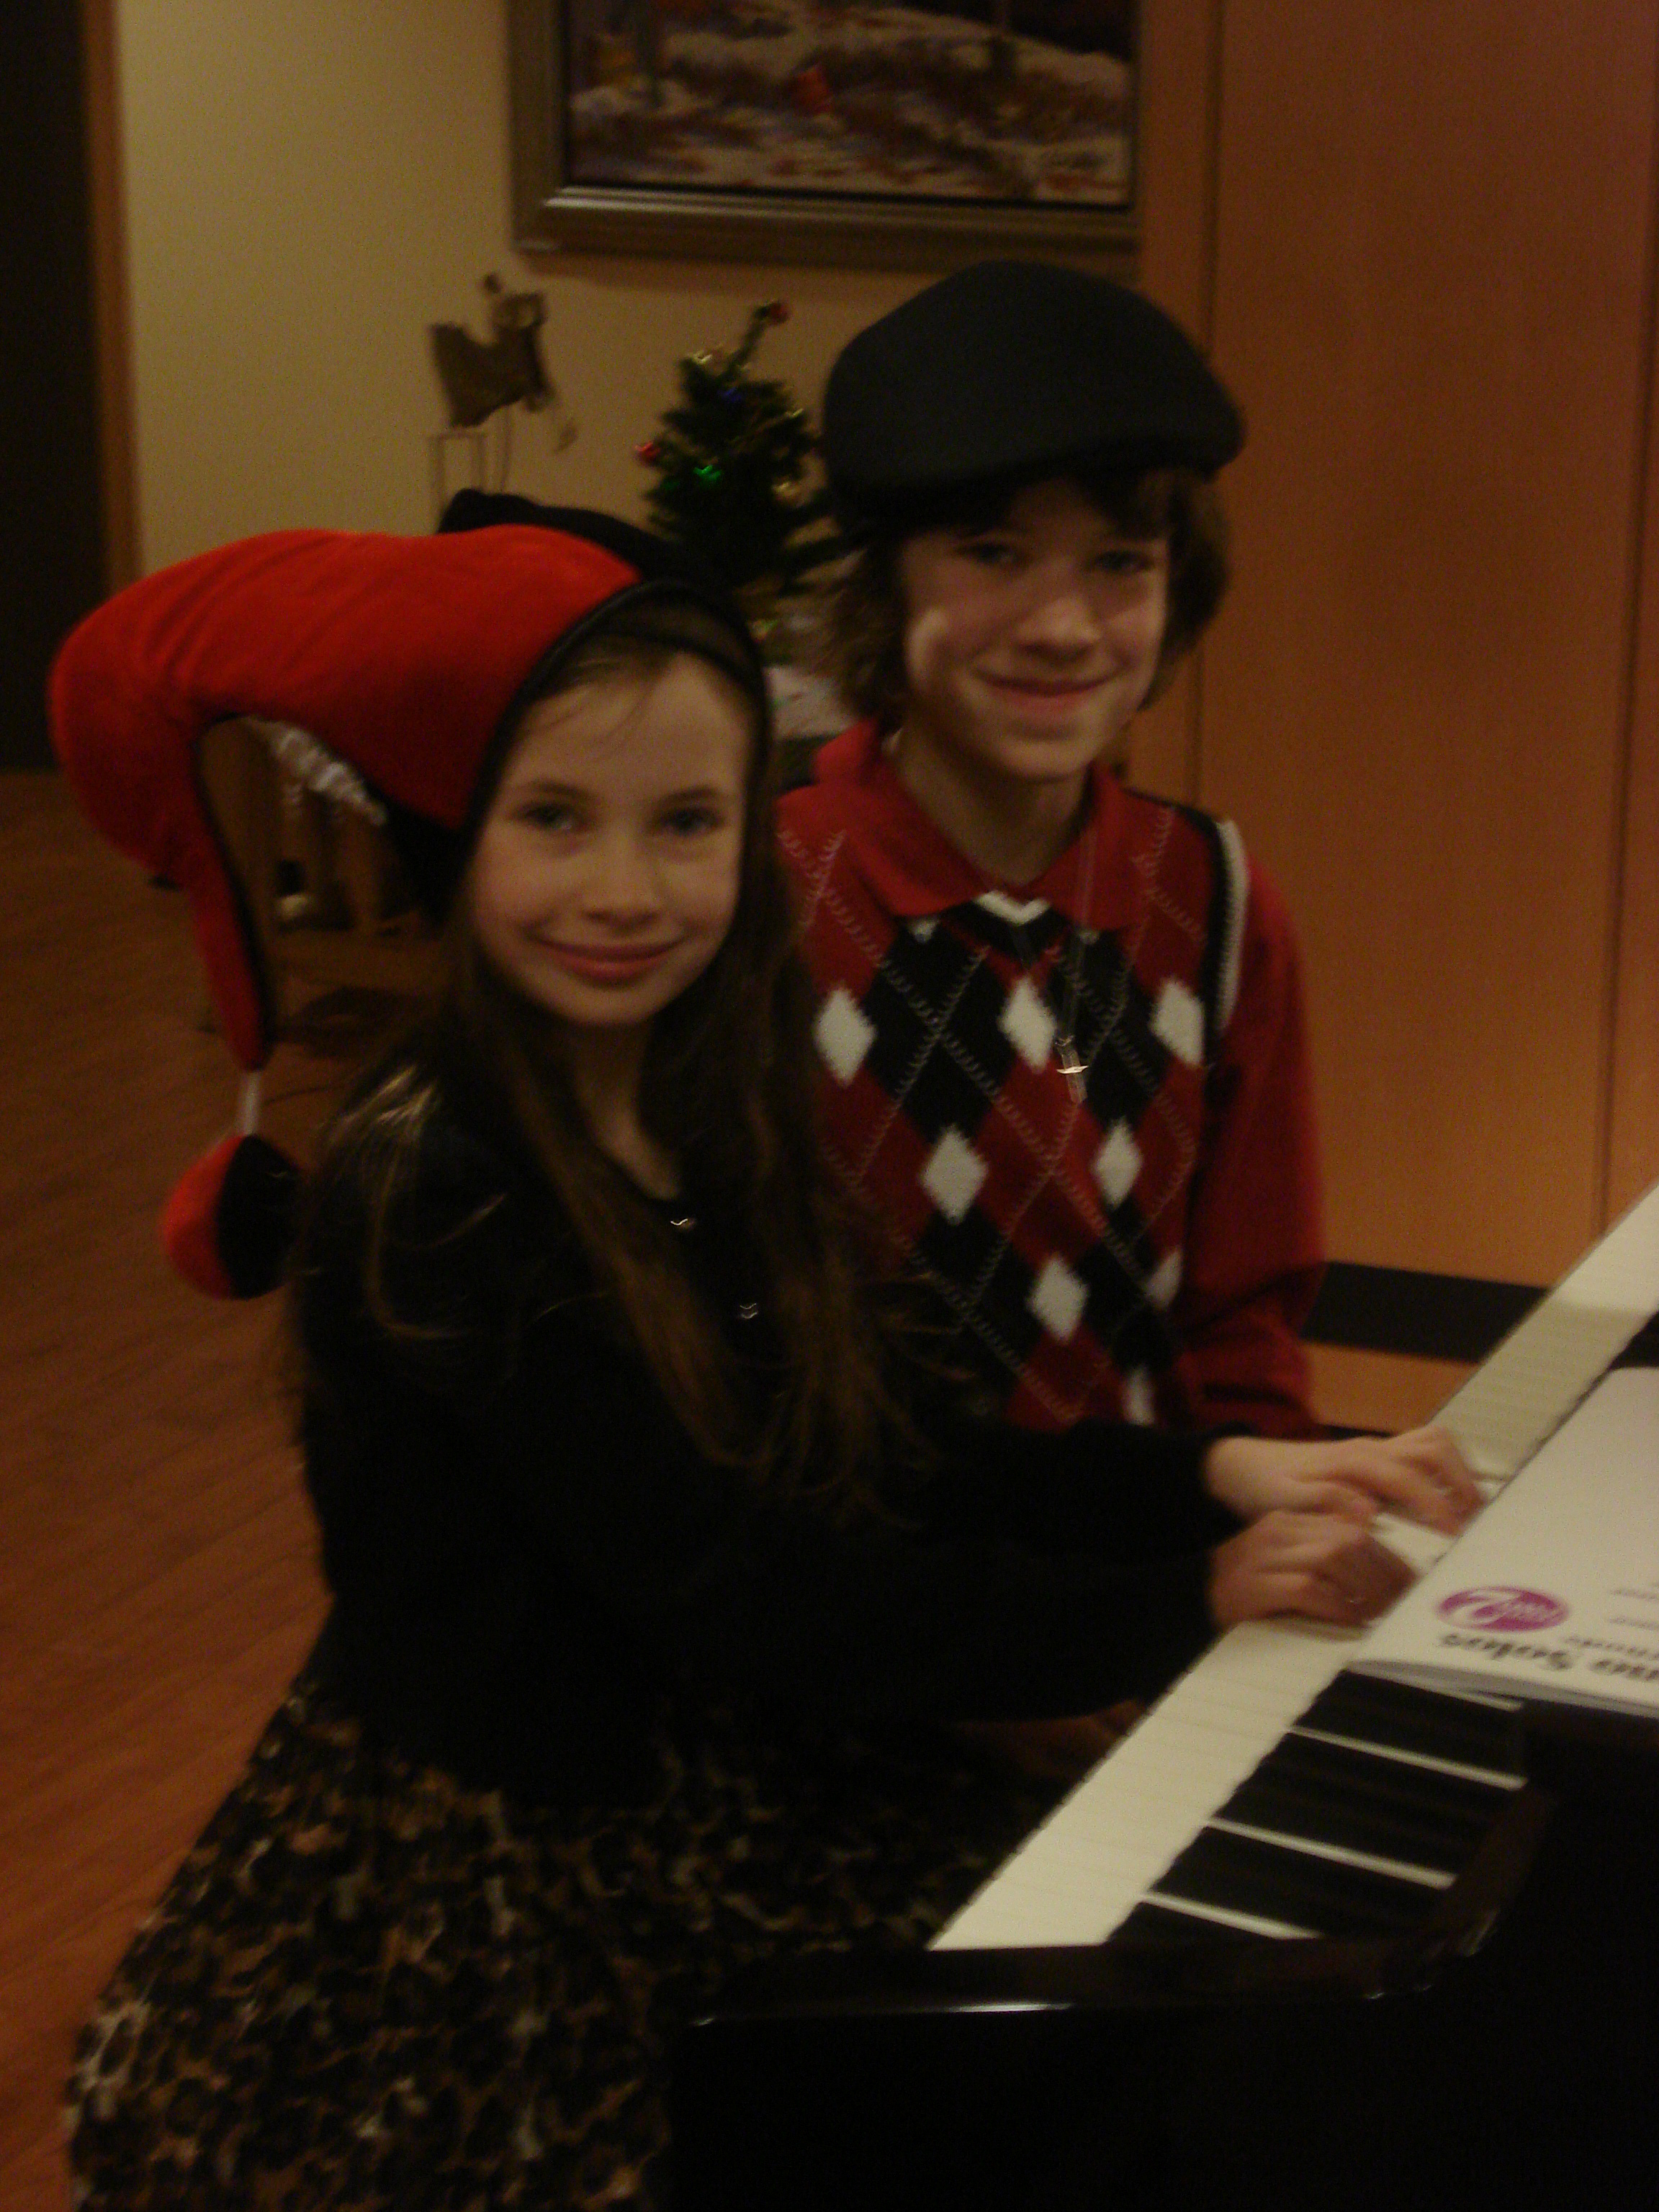 Malia and her brother Christian entertaining the patients on Christmas Day at the Ronald McDonald House.